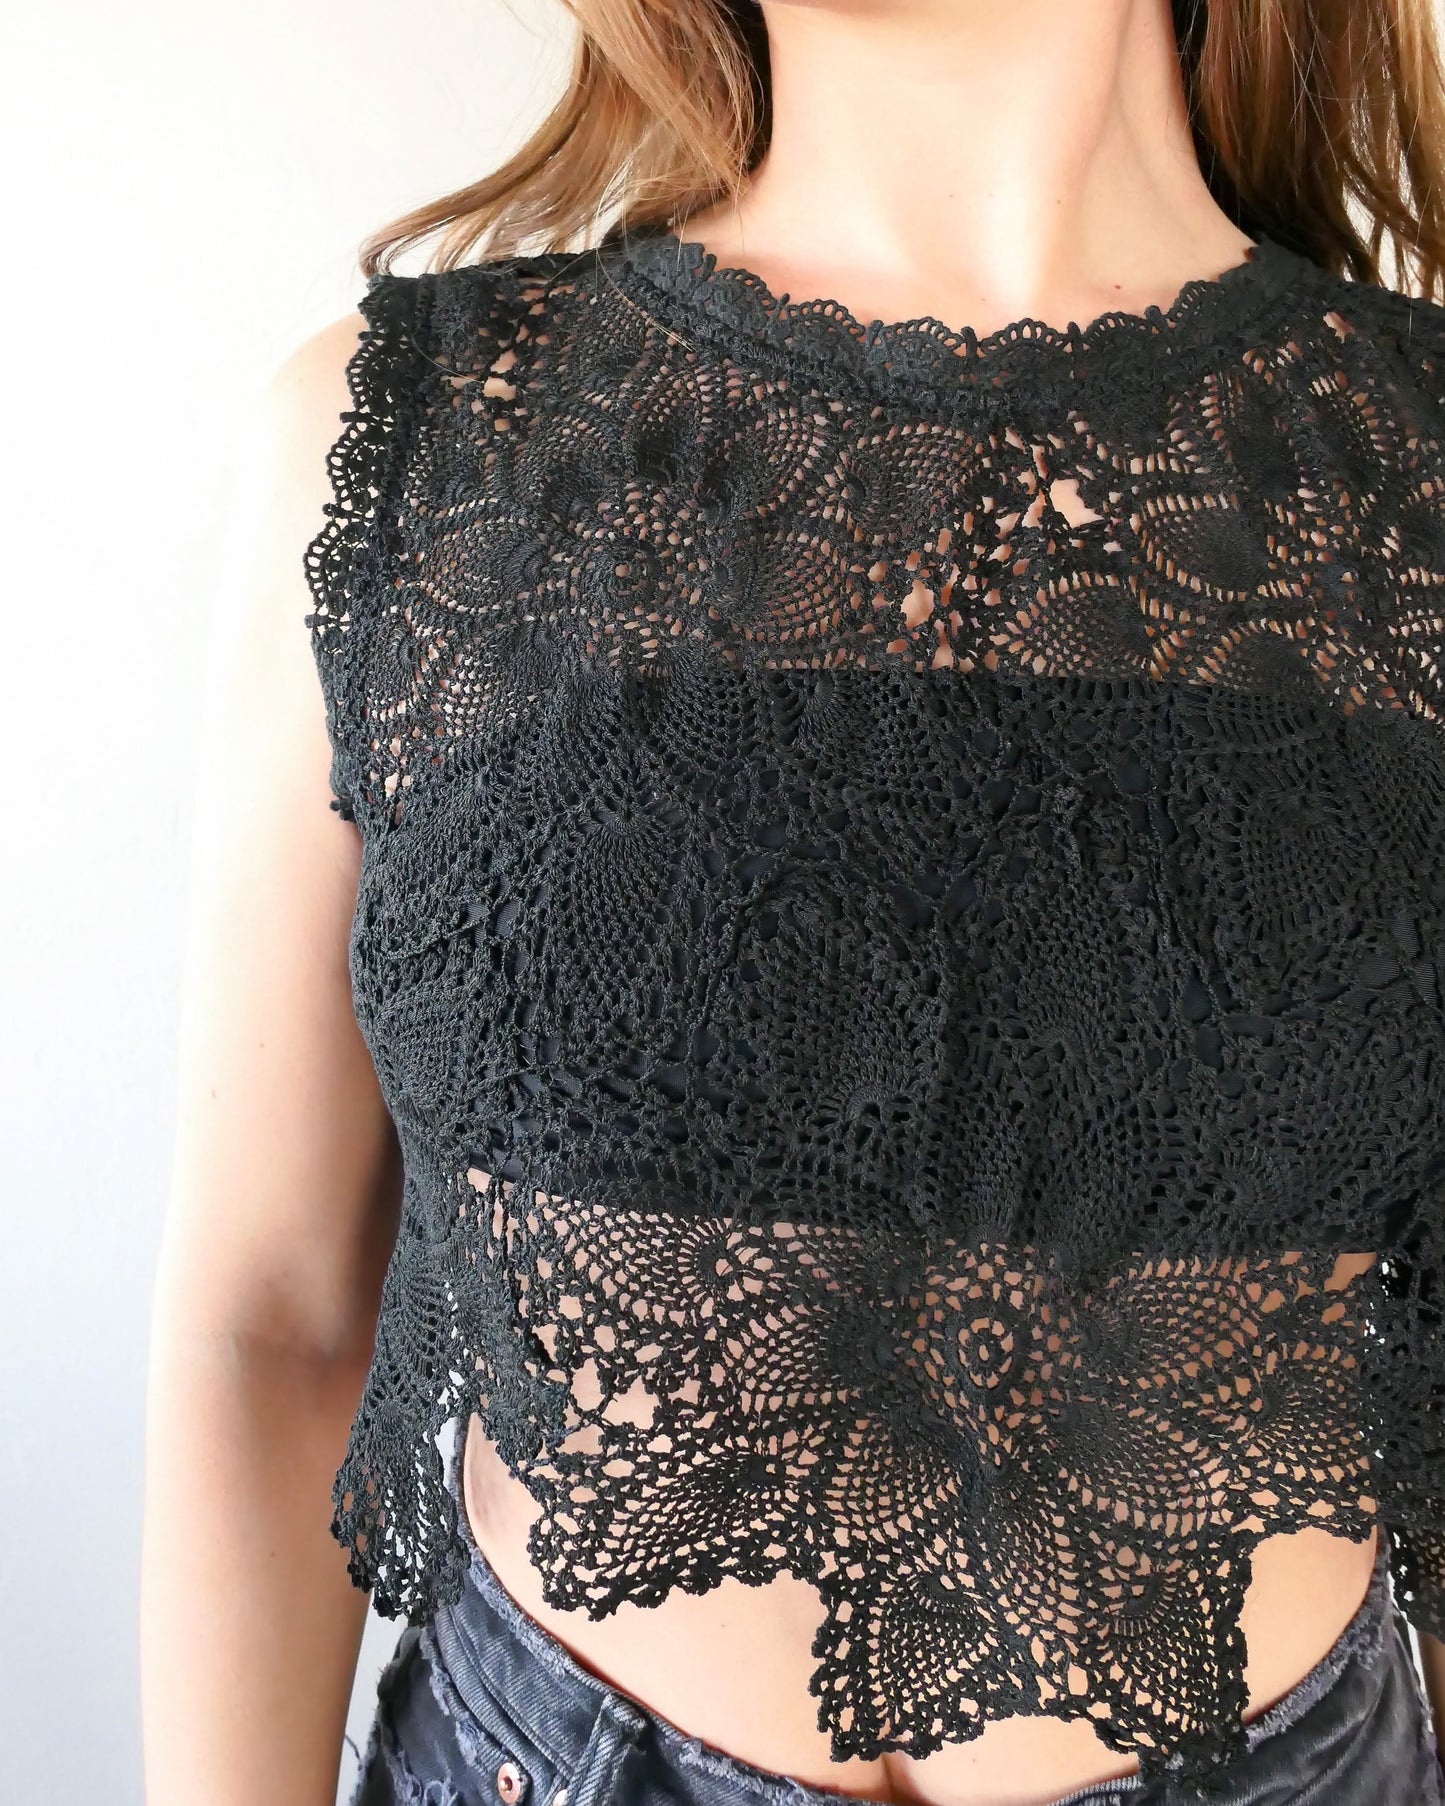 Closeup view of black crochet top. An ultra casual, hip, and boho-chic crop tank top made with interconnected flower doilies reminiscent of the white lotus, which symbolizes peace, tranquility, and calmness.  Lace trim at the collar and sleeve.  Model is wearing black colored top by Lim's Vintage.